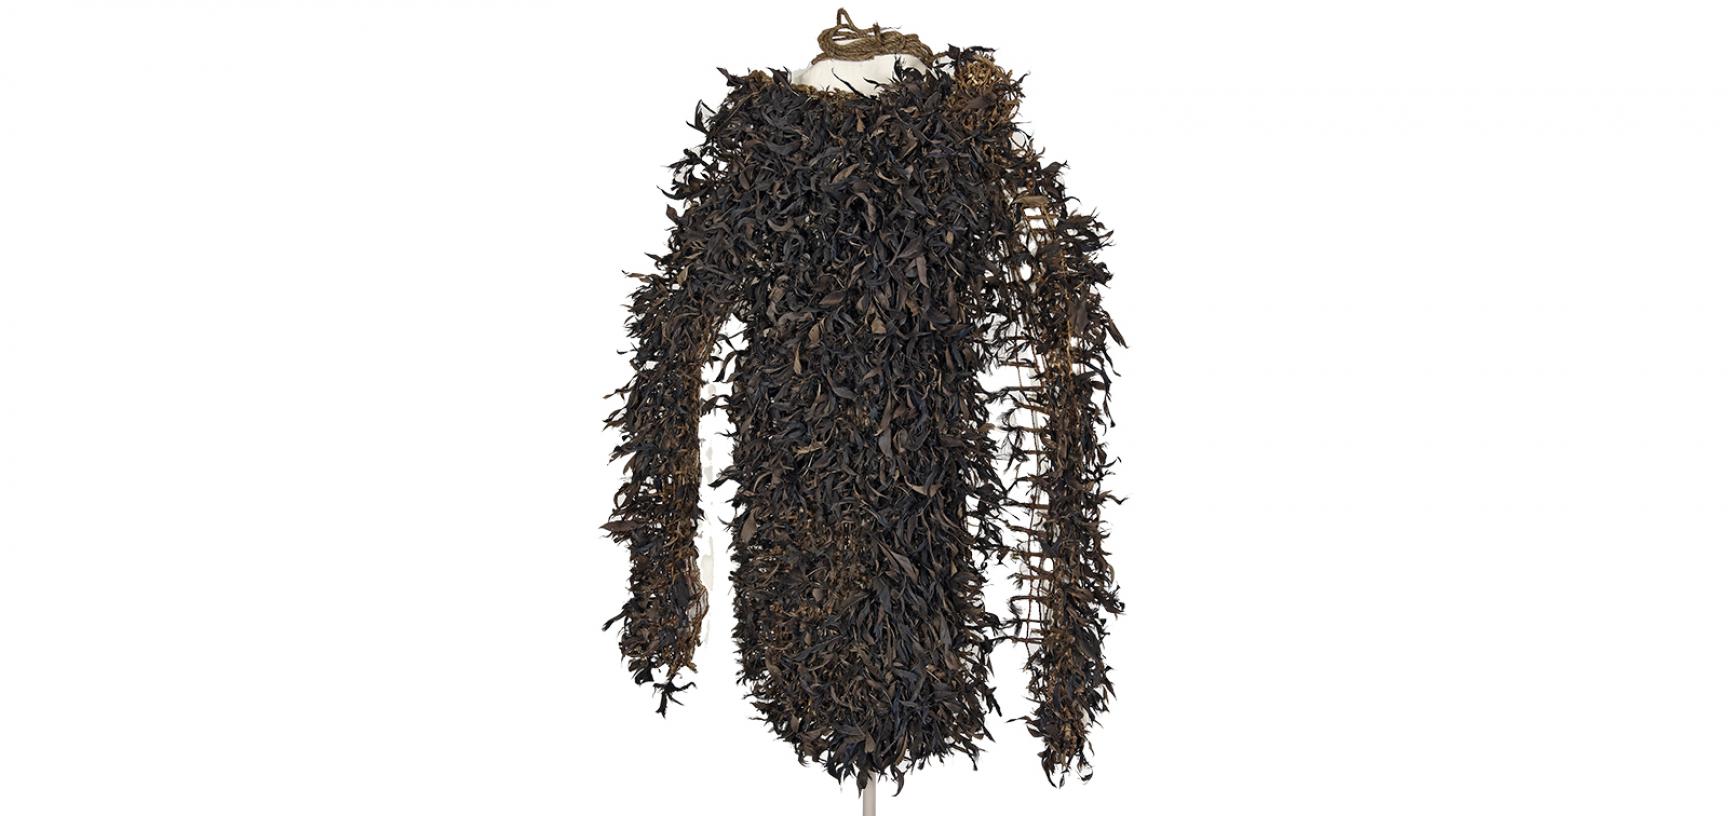 The feather cloak of the mourner's costume (1886.1.1637.4)